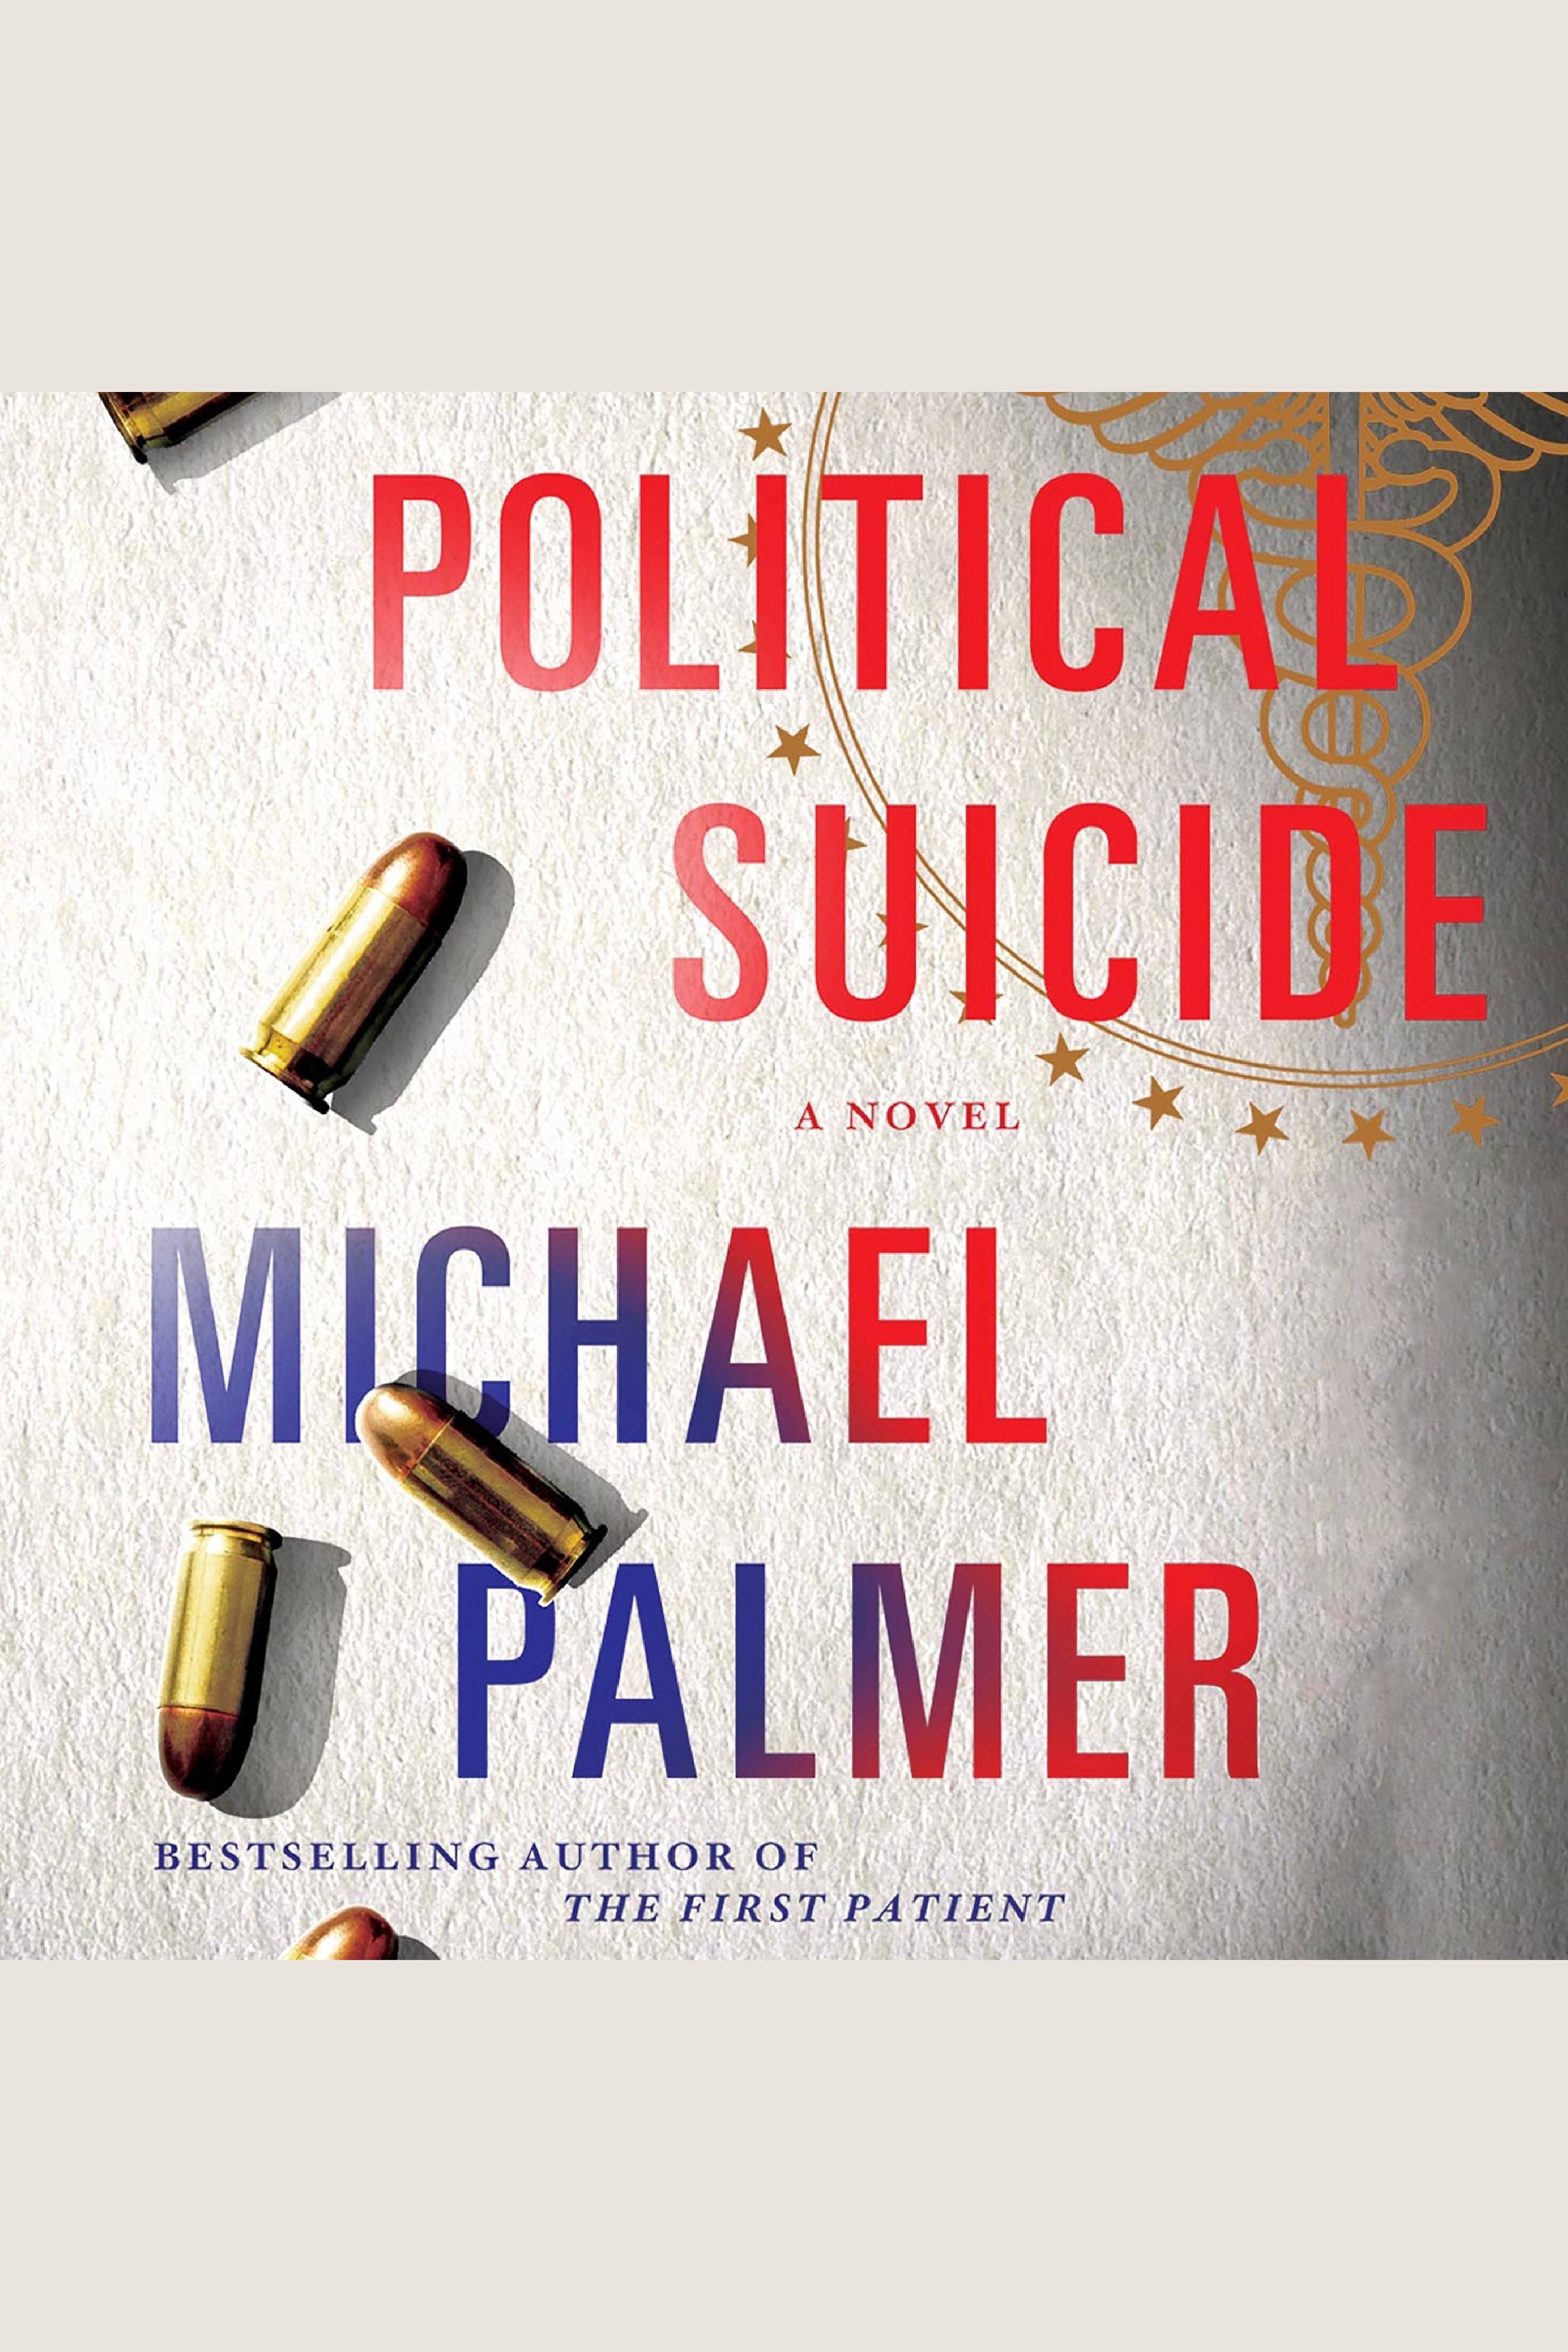 Political suicide cover image